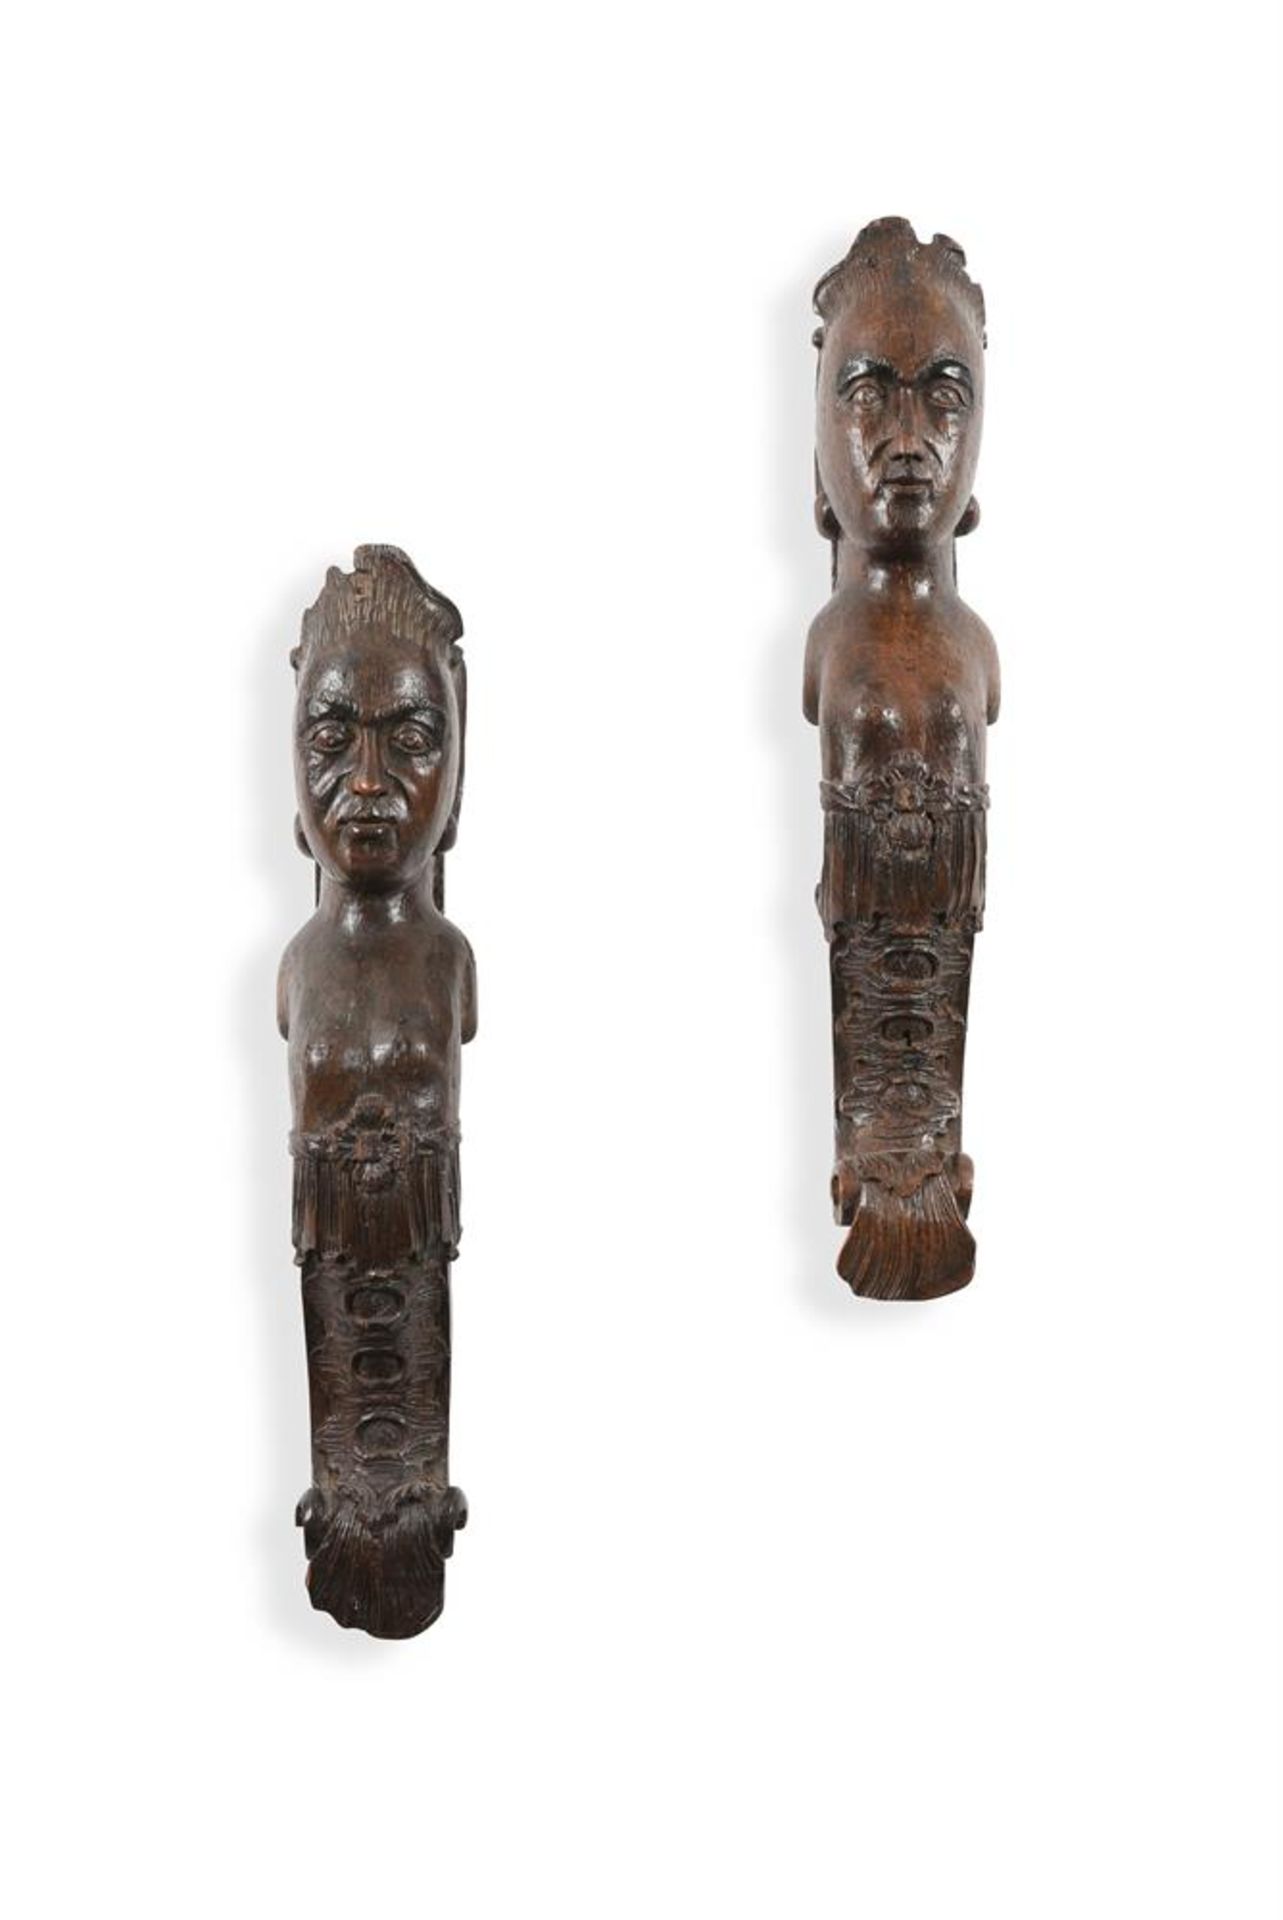 A PAIR OF CARVED OAK HERM FIGURES, 18TH CENTURY AND LATER